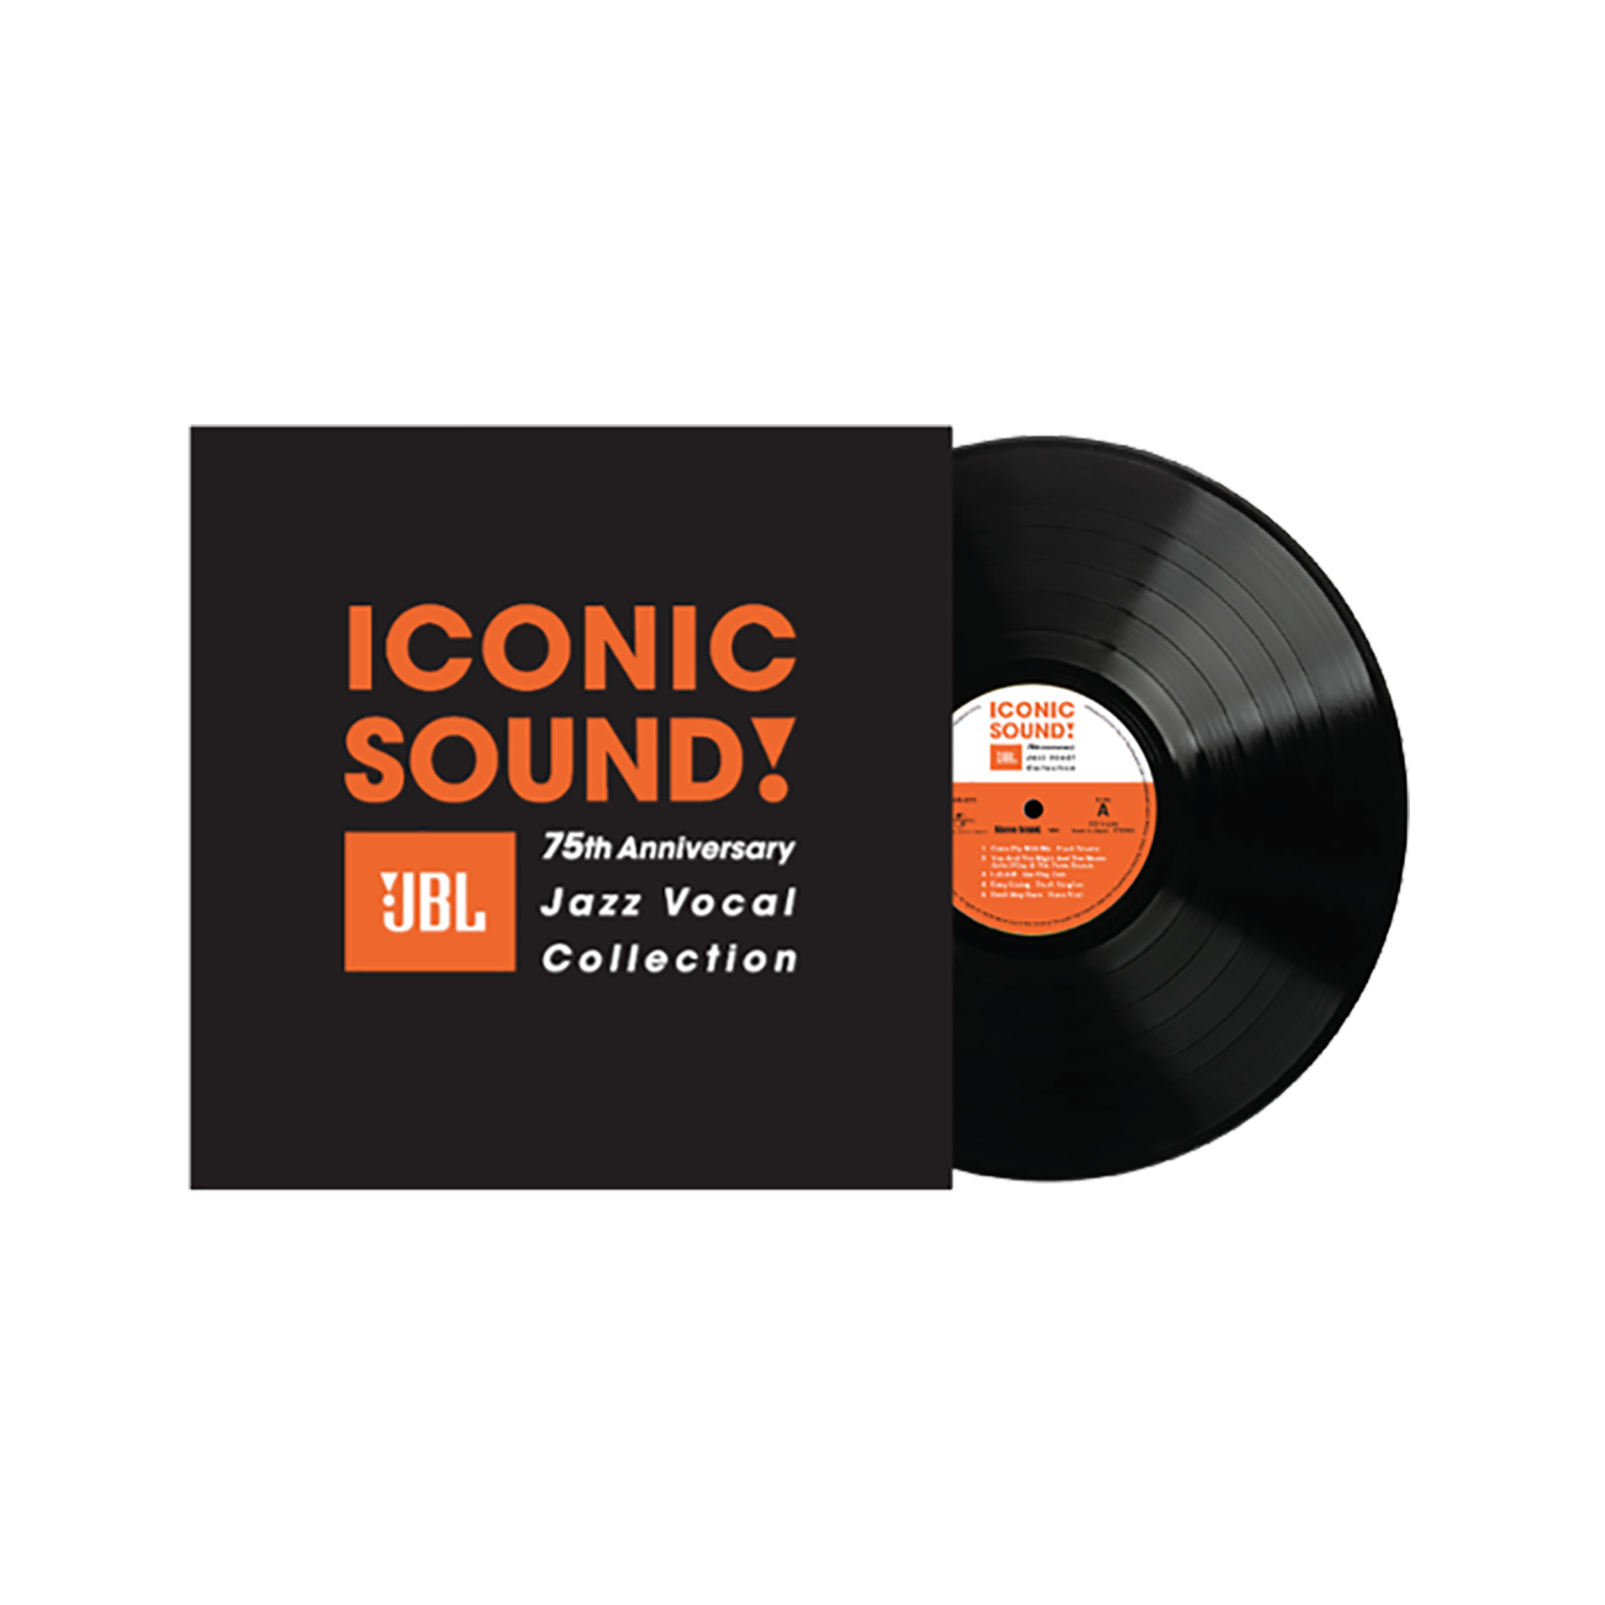 ICONIC SOUND! - The JBL 75th Anniversary Jazz Vocal Collection